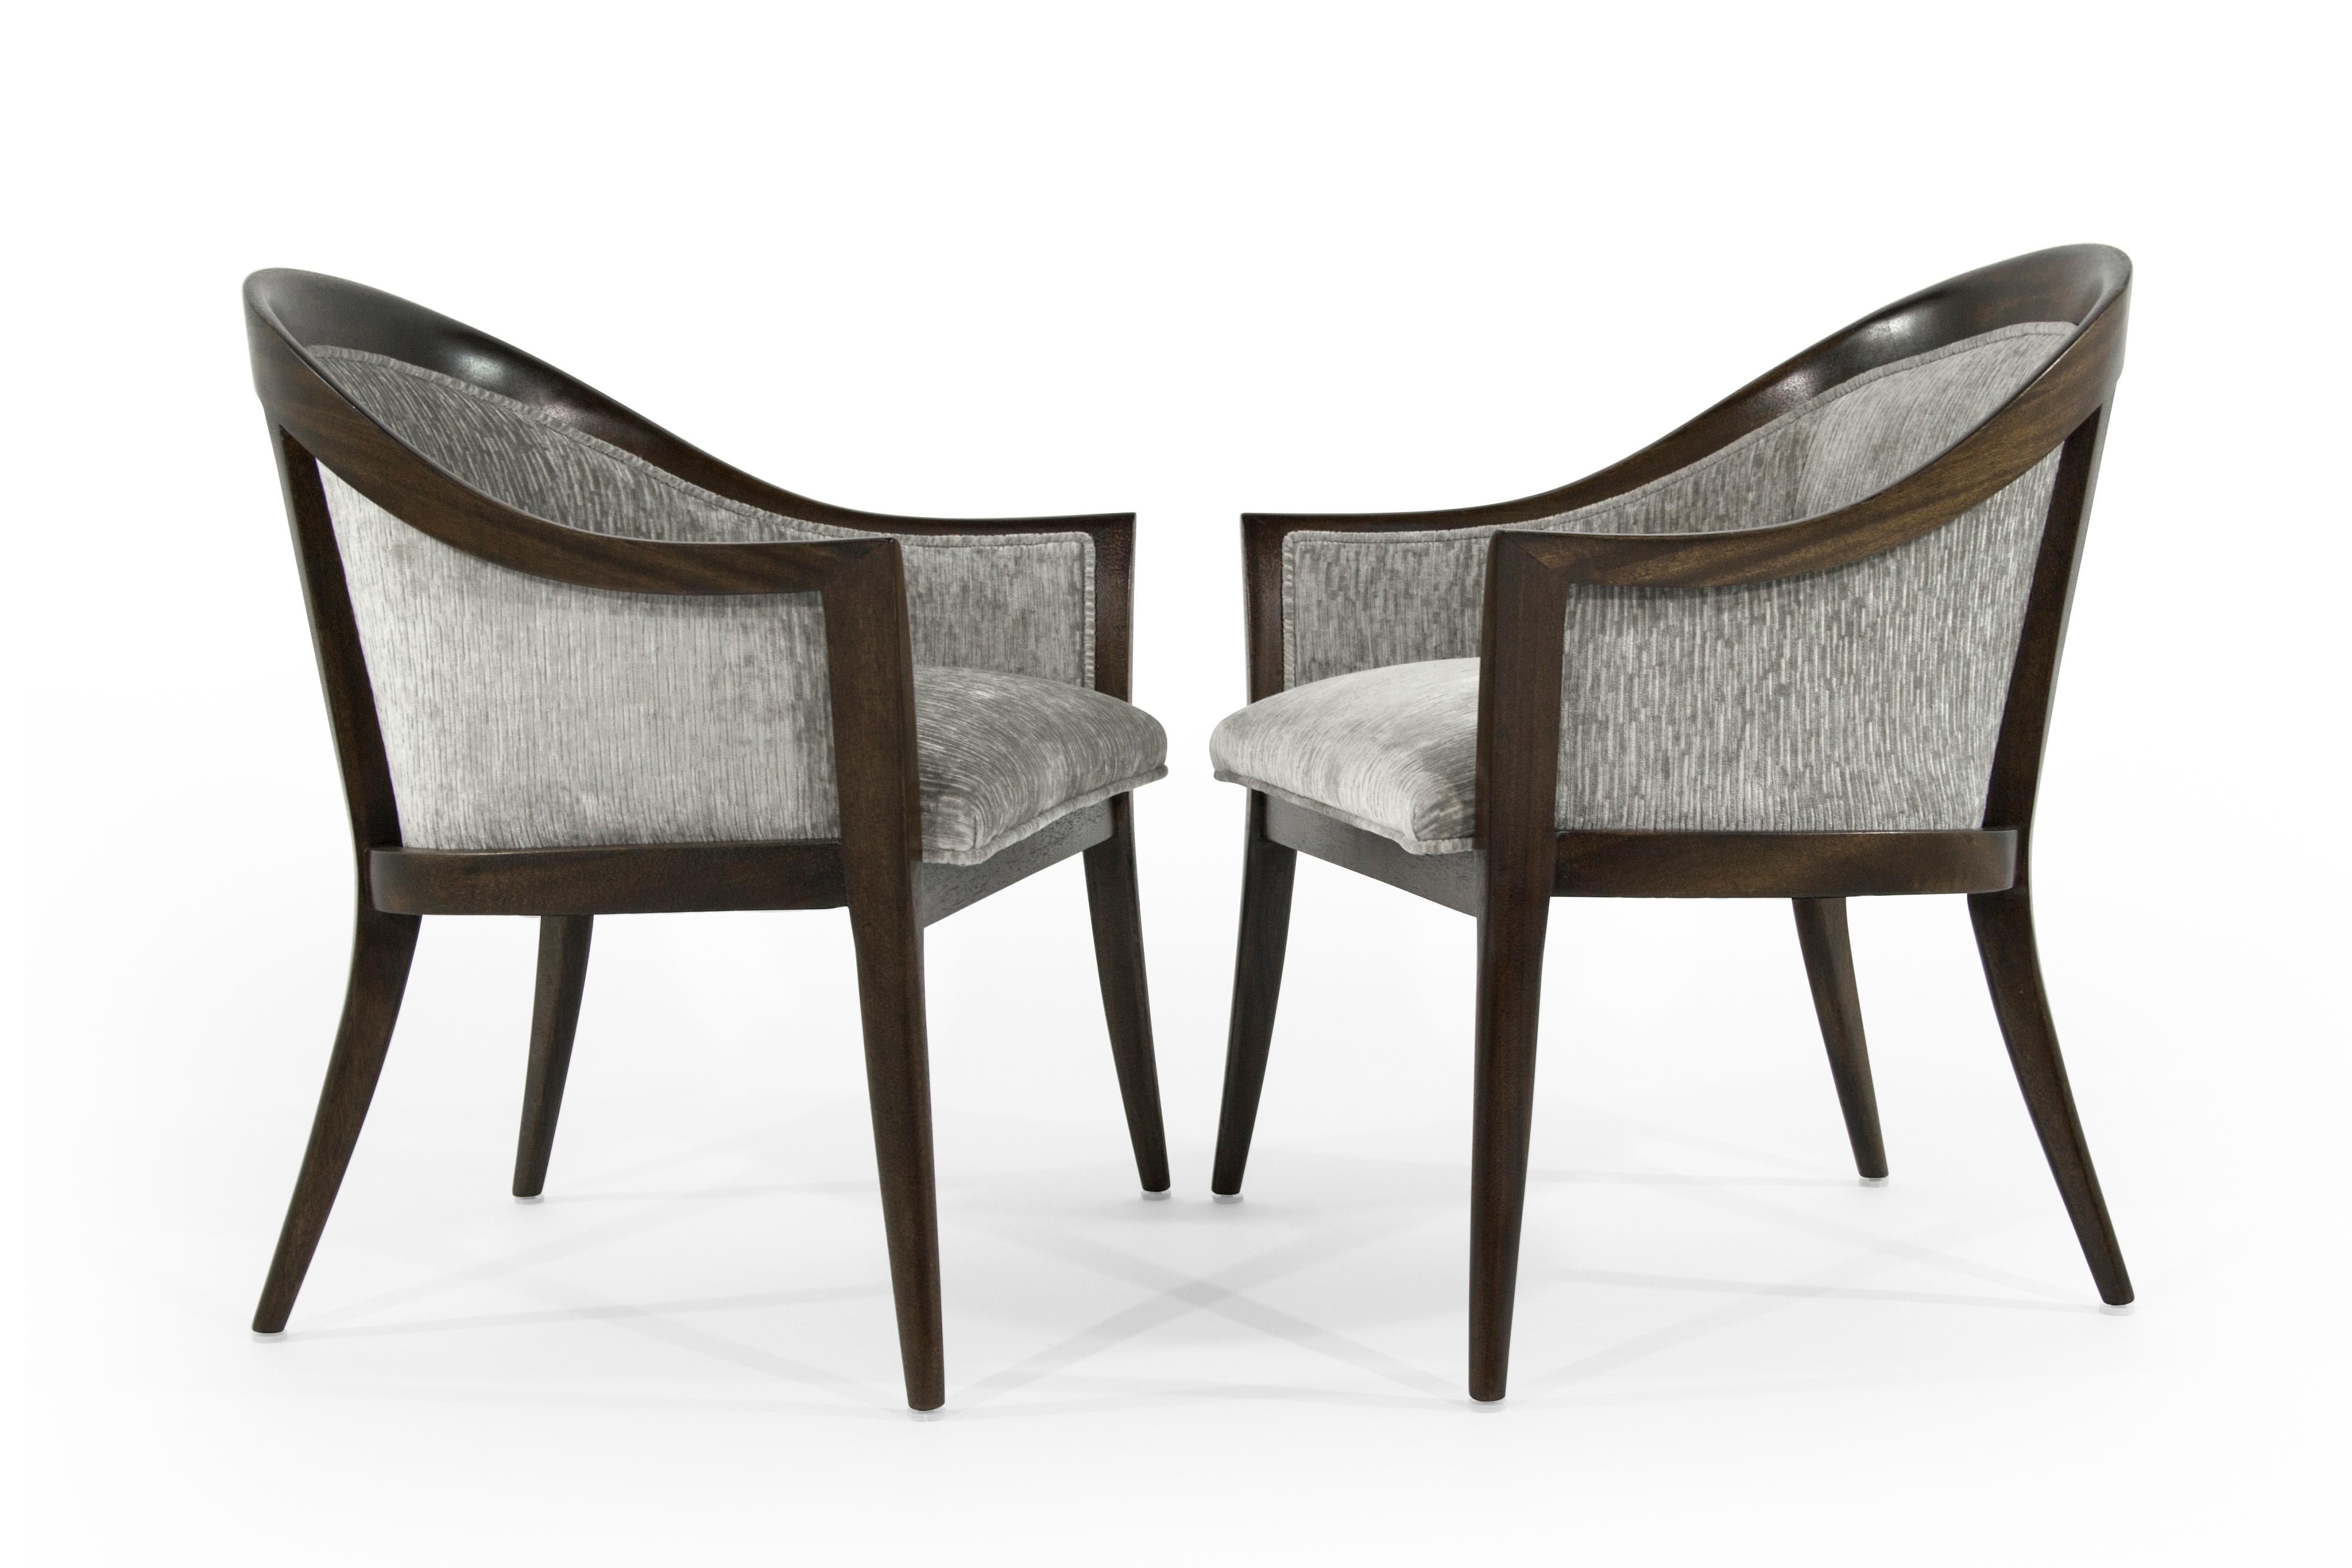 Pair of lounge chairs designed by Harvey Probber, circa 1950s.

Sculptural mahogany framing fully restored. Newly upholstered in grey chenille.